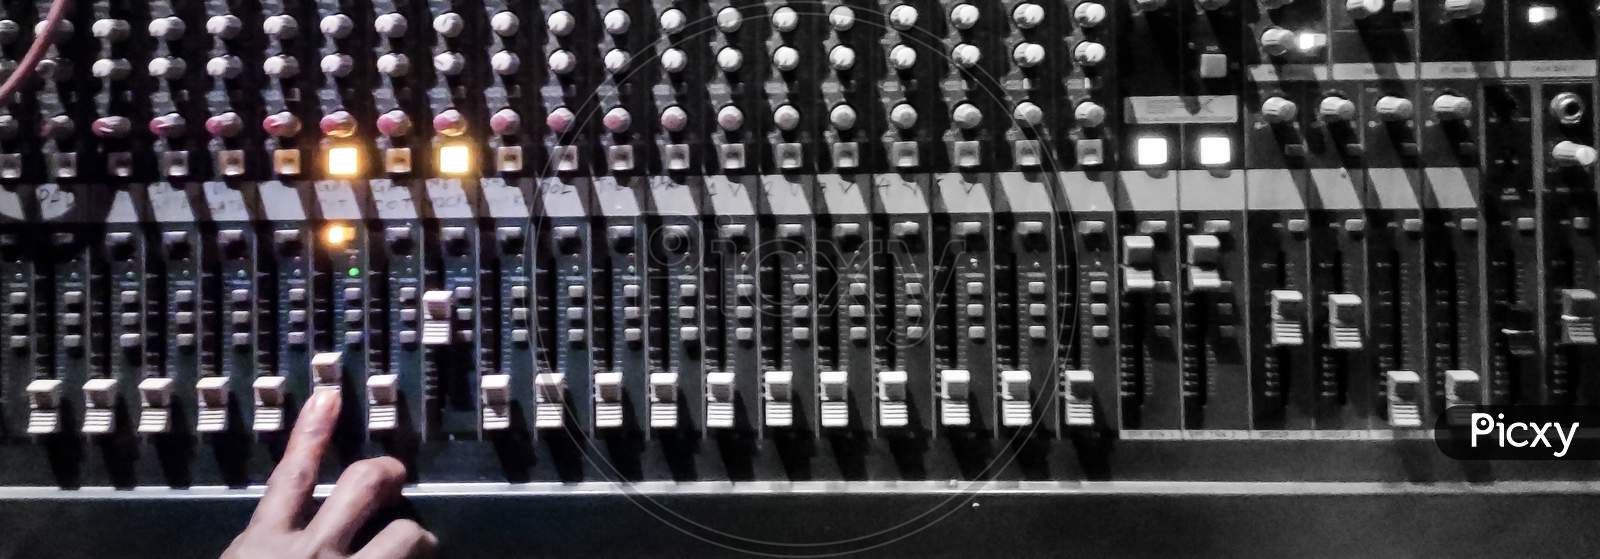 Audio Console.Amplifying Equipment That Adjusts Studio Audio Mixer Knobs And Faders. Workplace And Equipment Of The Sound Engineer. Acoustic Mixing Of Music, Selective Focus. Banner.